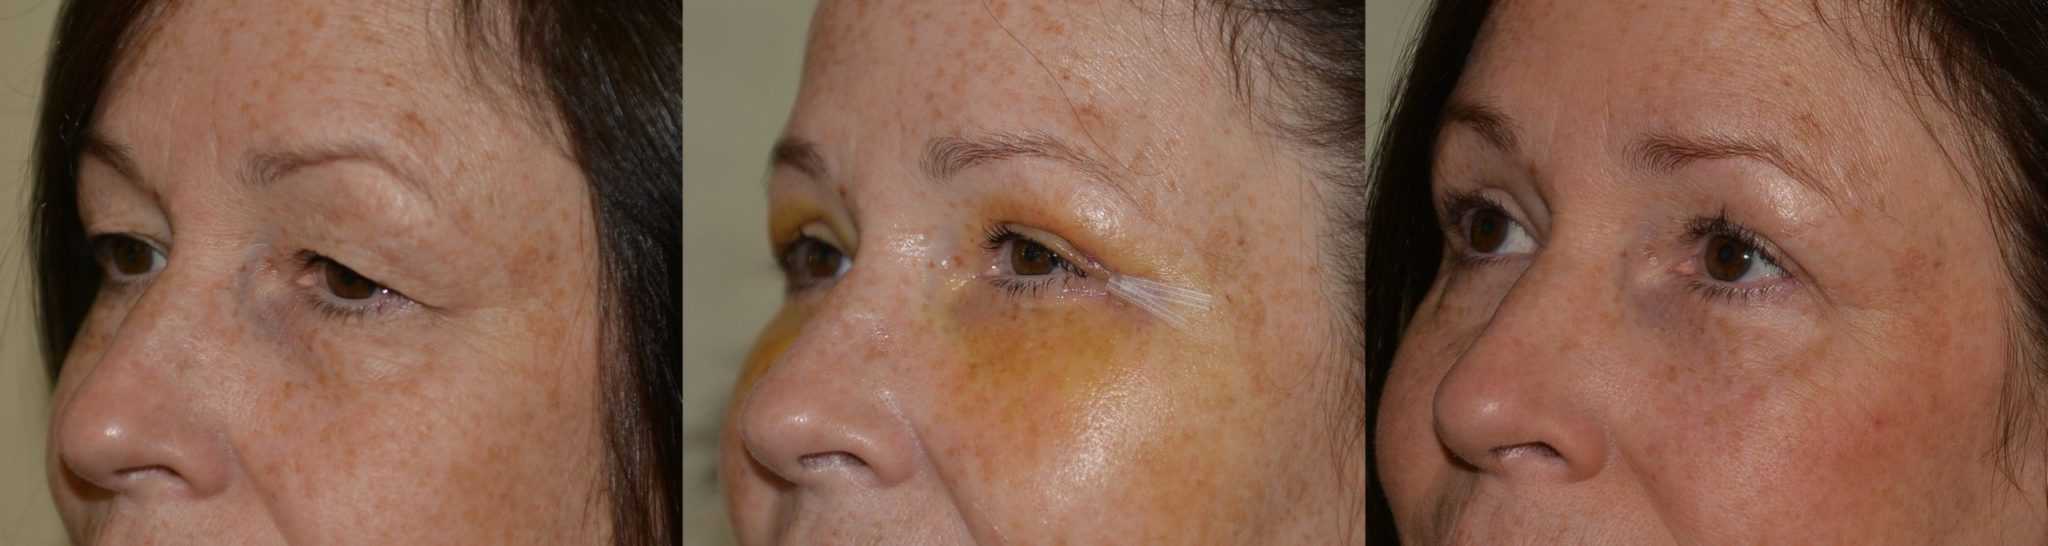 Eyelid surgery with fat transfer